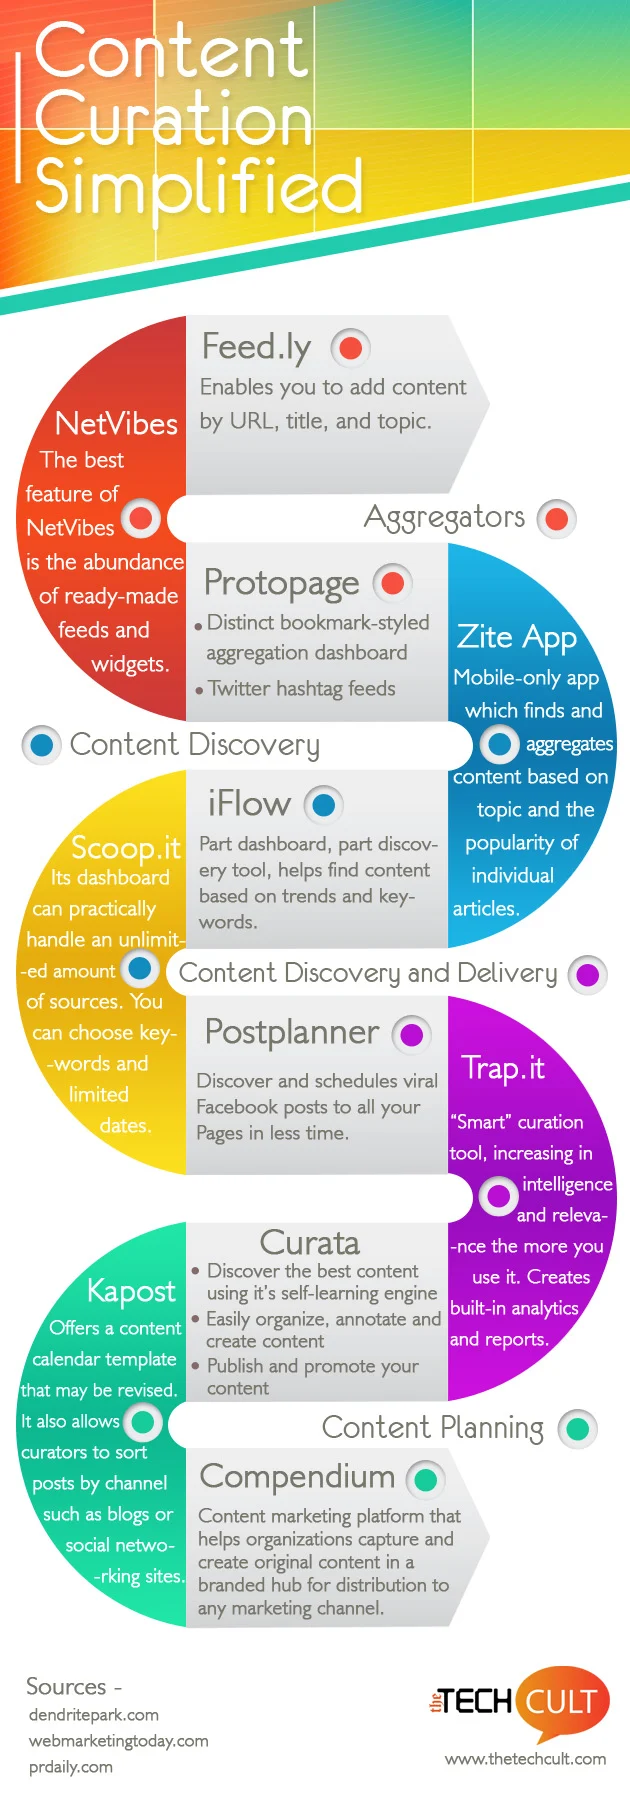 Content Curation Simplified: An #Infographic - #contentmarketing